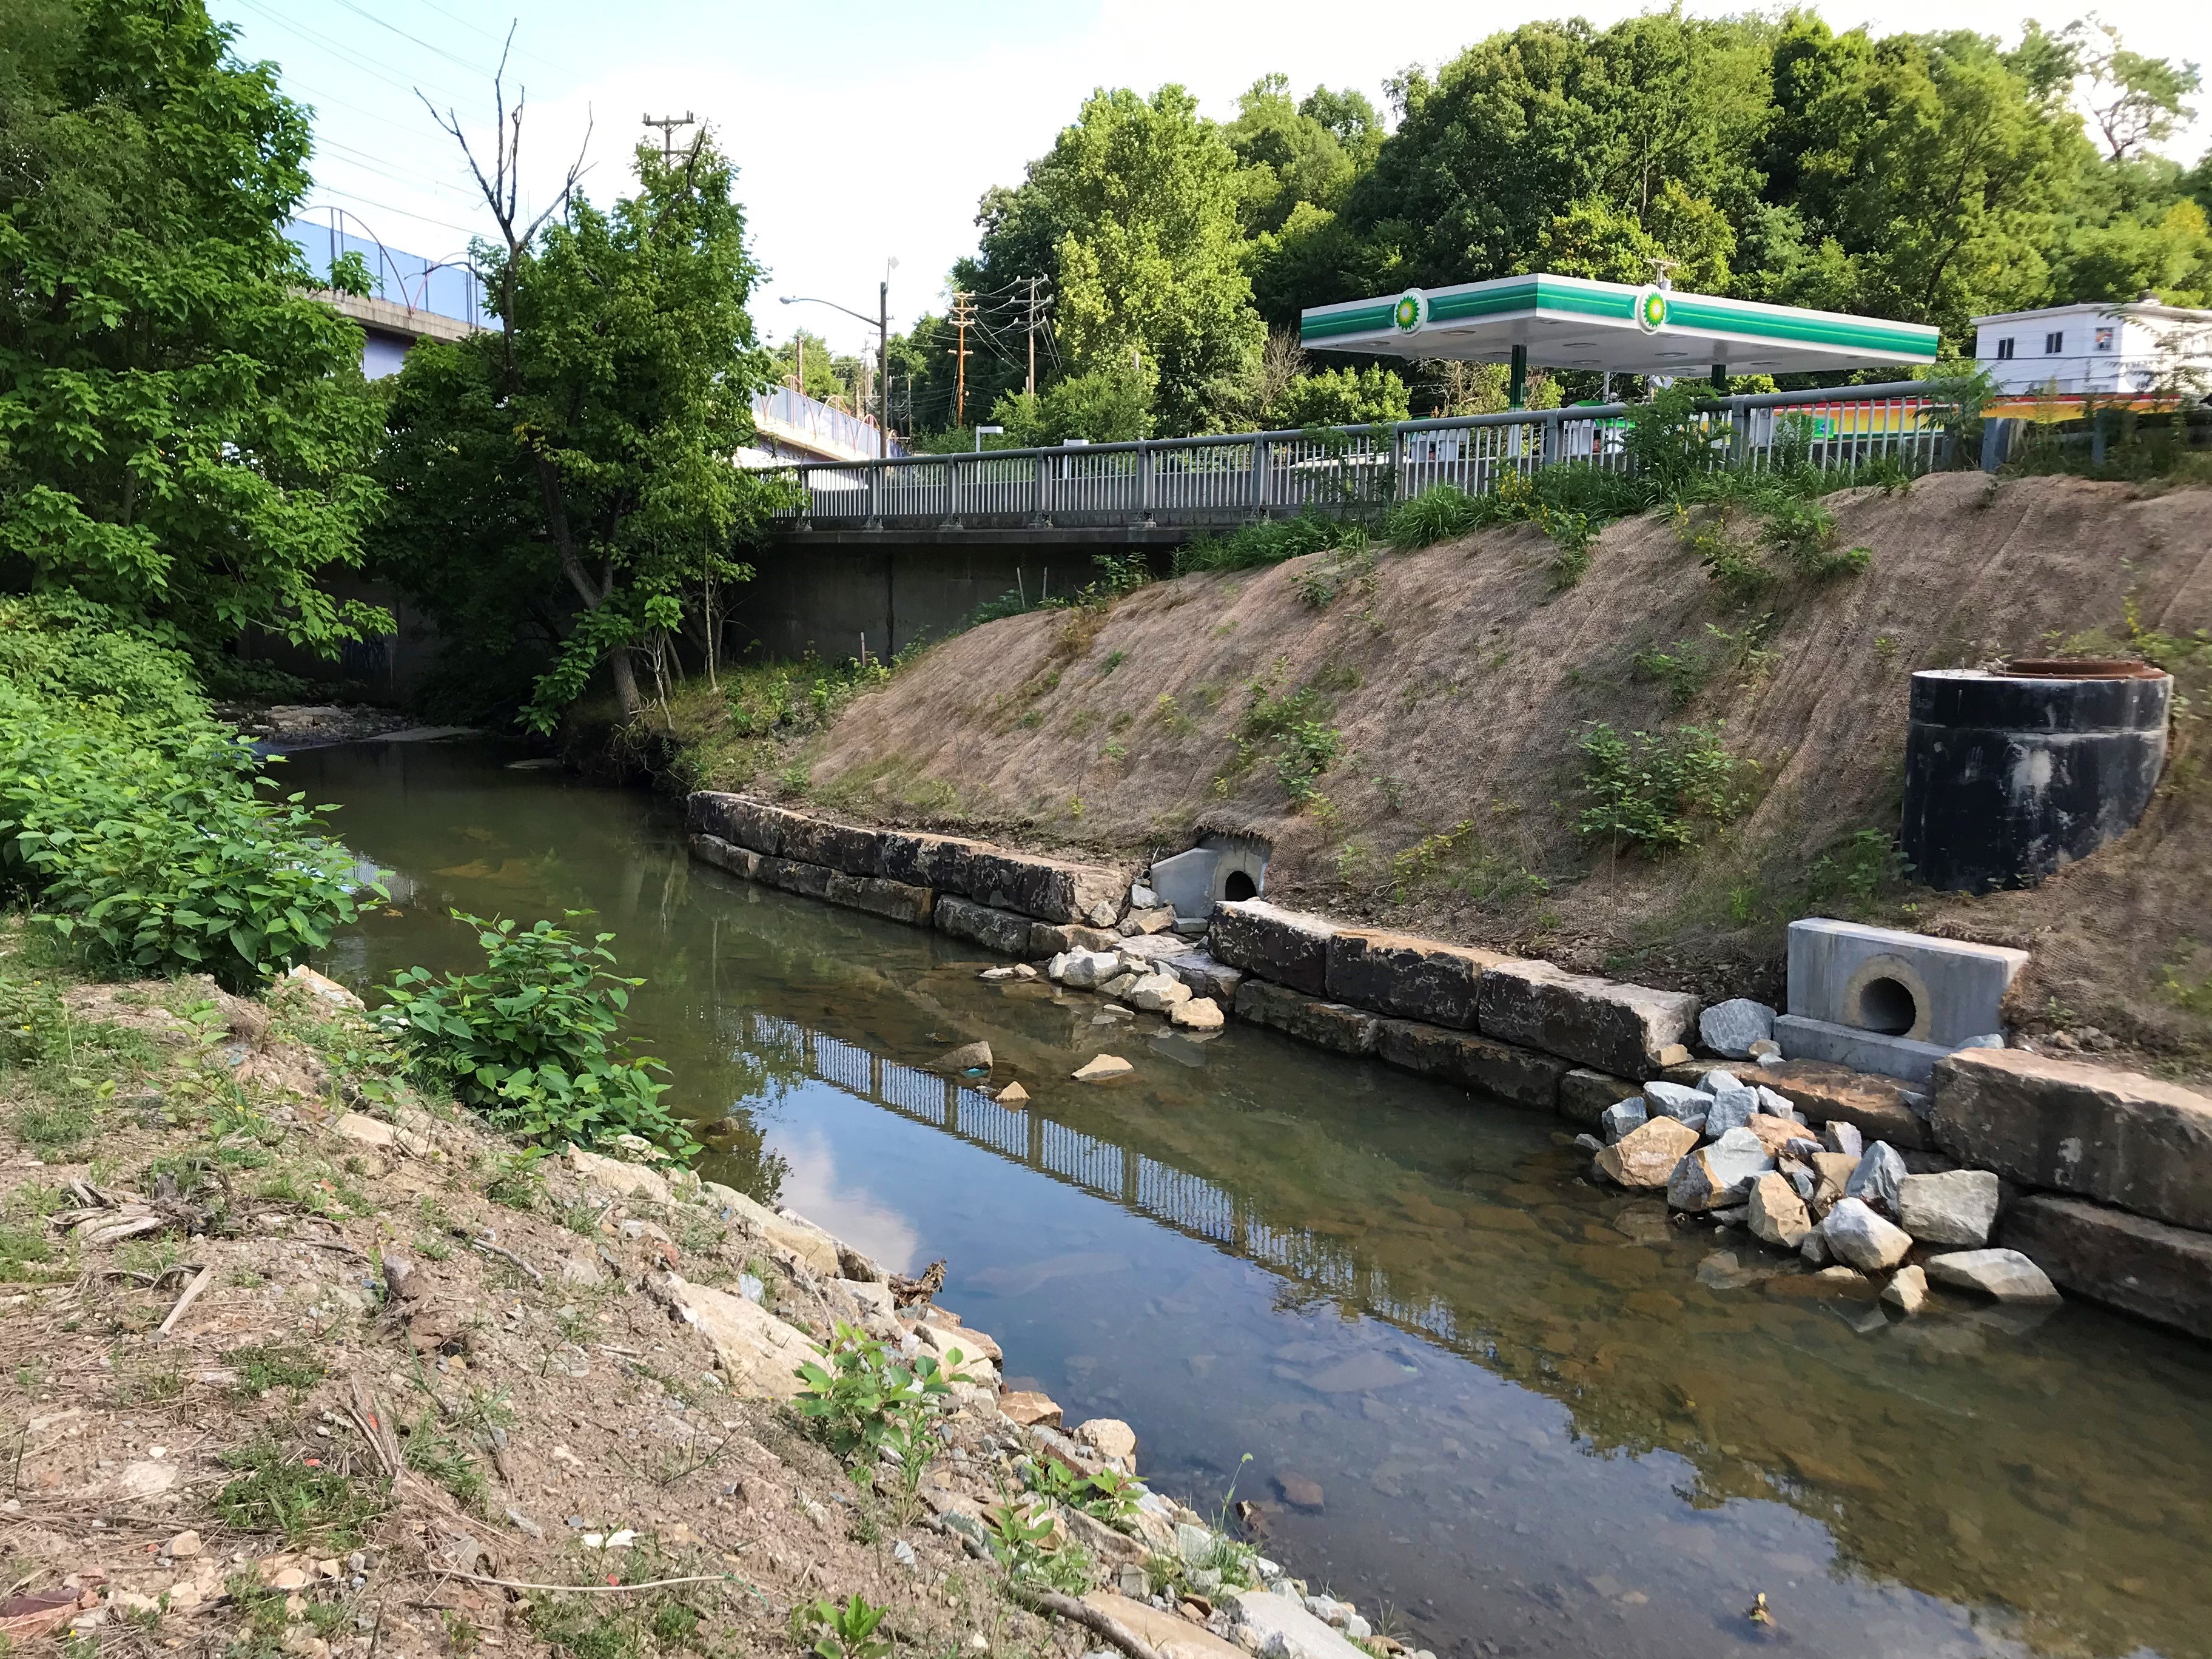 Photo of the Saw Mill Run stream restoration project by Ansonia Place, showing two restored storm sewer outfalls and boulders lining the stream